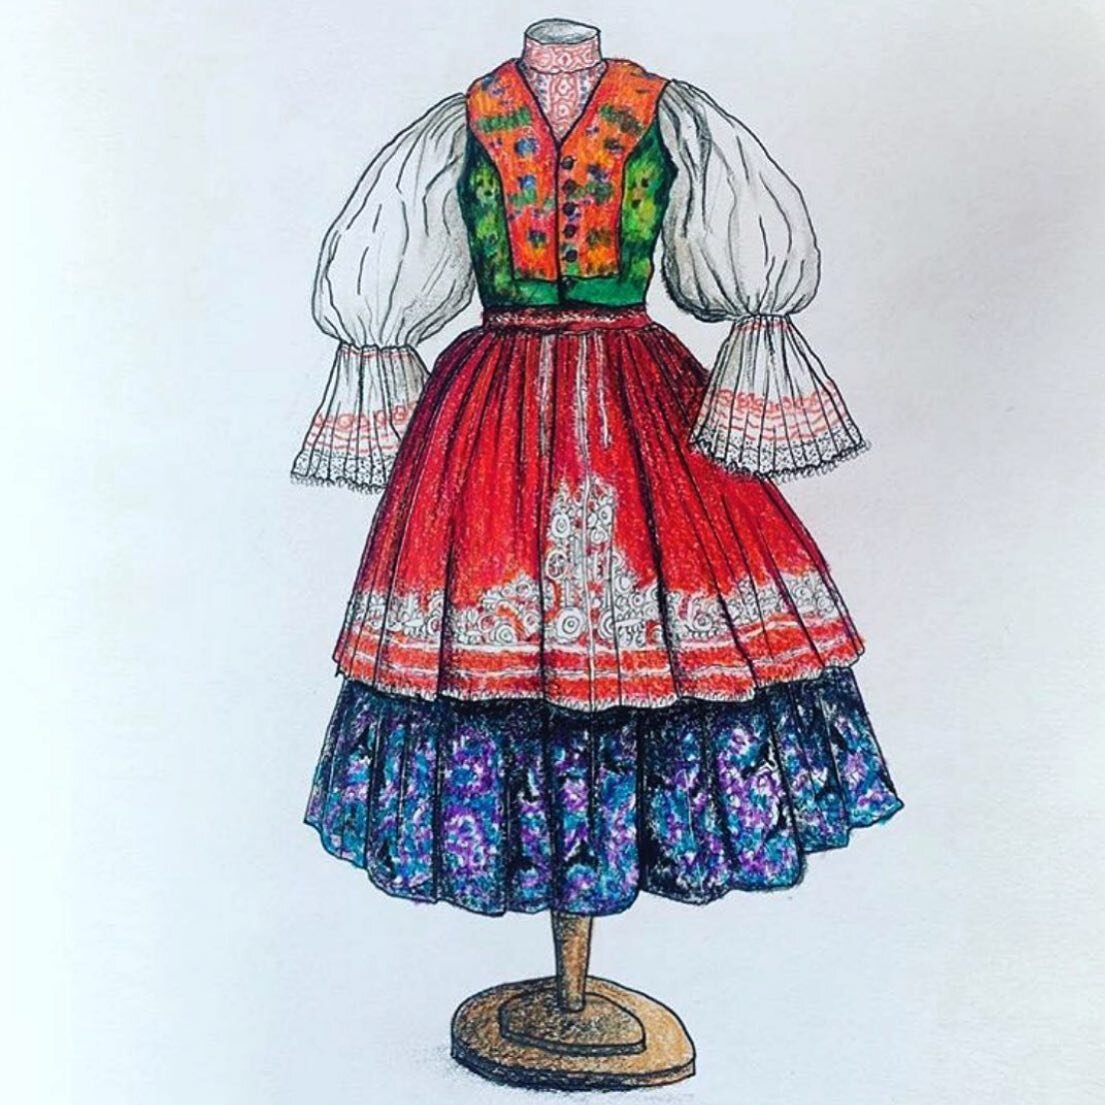 Slovak Folk Costume with printed, pleated wool and cotton skirt, embroidered silk waistcoat and cotton blouse. Original garment housed at the Metropolitan Museum of Art. Pen, ink and crayon drawing #peninkandcrayon #drawing #linedrawing #historicaldr